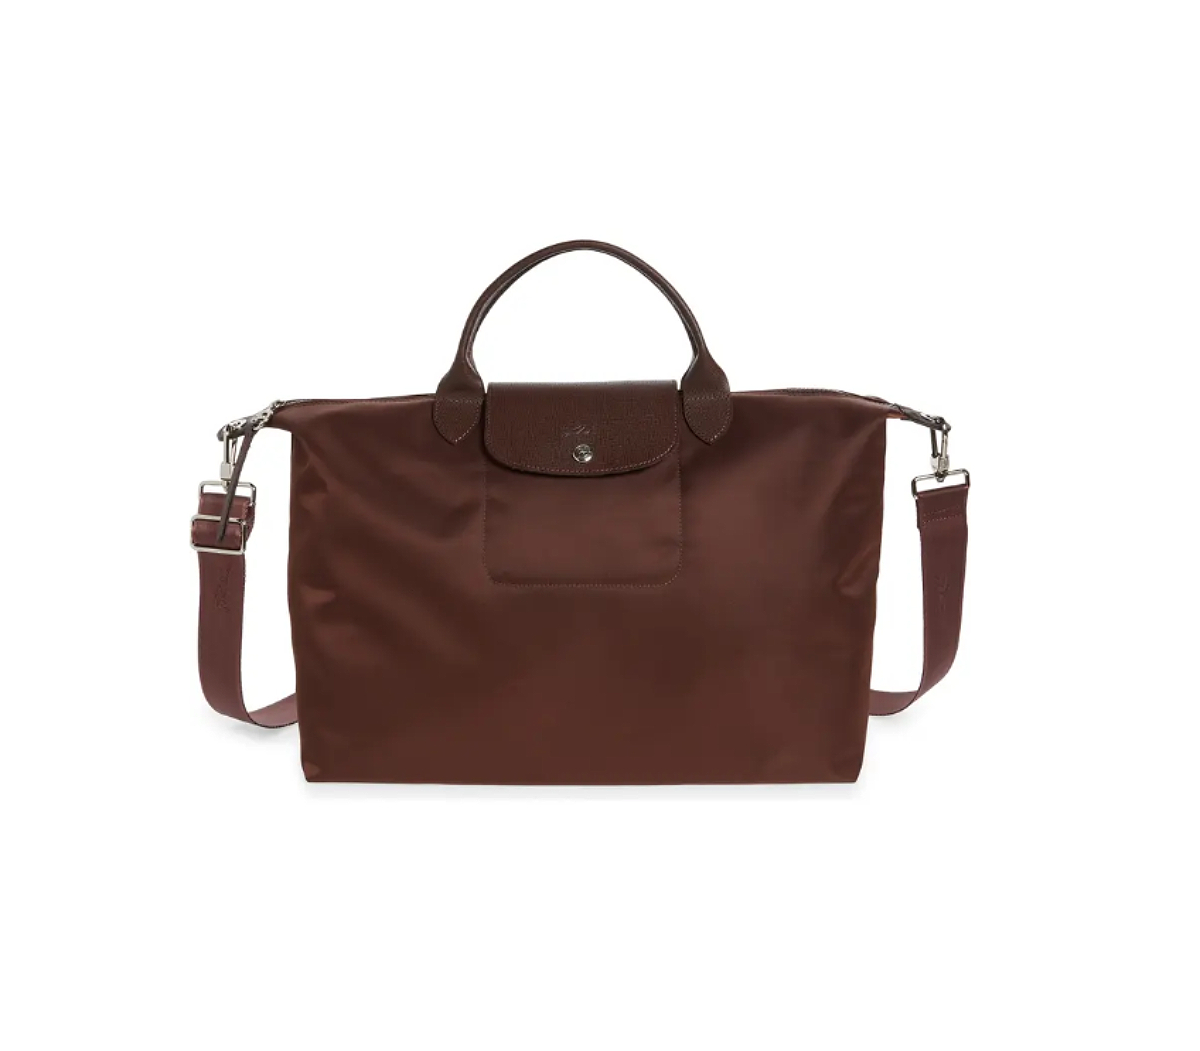 Longchamp! Dagne Dover! 5 Travel Bags in the Nordstrom Sale — Up to $150 Off